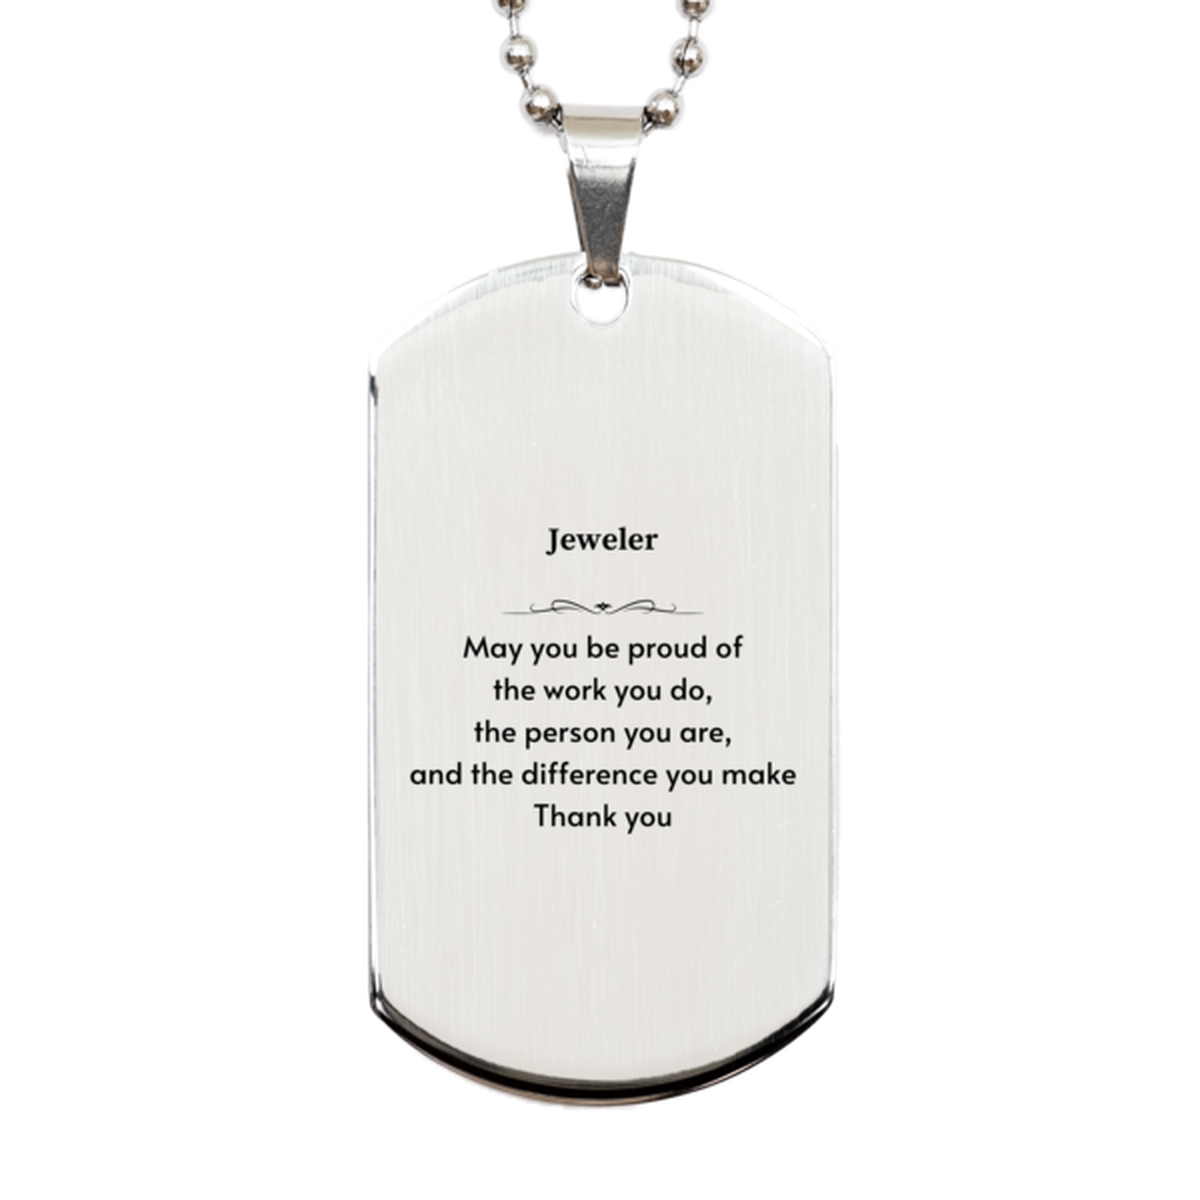 Heartwarming Silver Dog Tag Retirement Coworkers Gifts for Jeweler, Jeweler May You be proud of the work you do, the person you are Gifts for Boss Men Women Friends